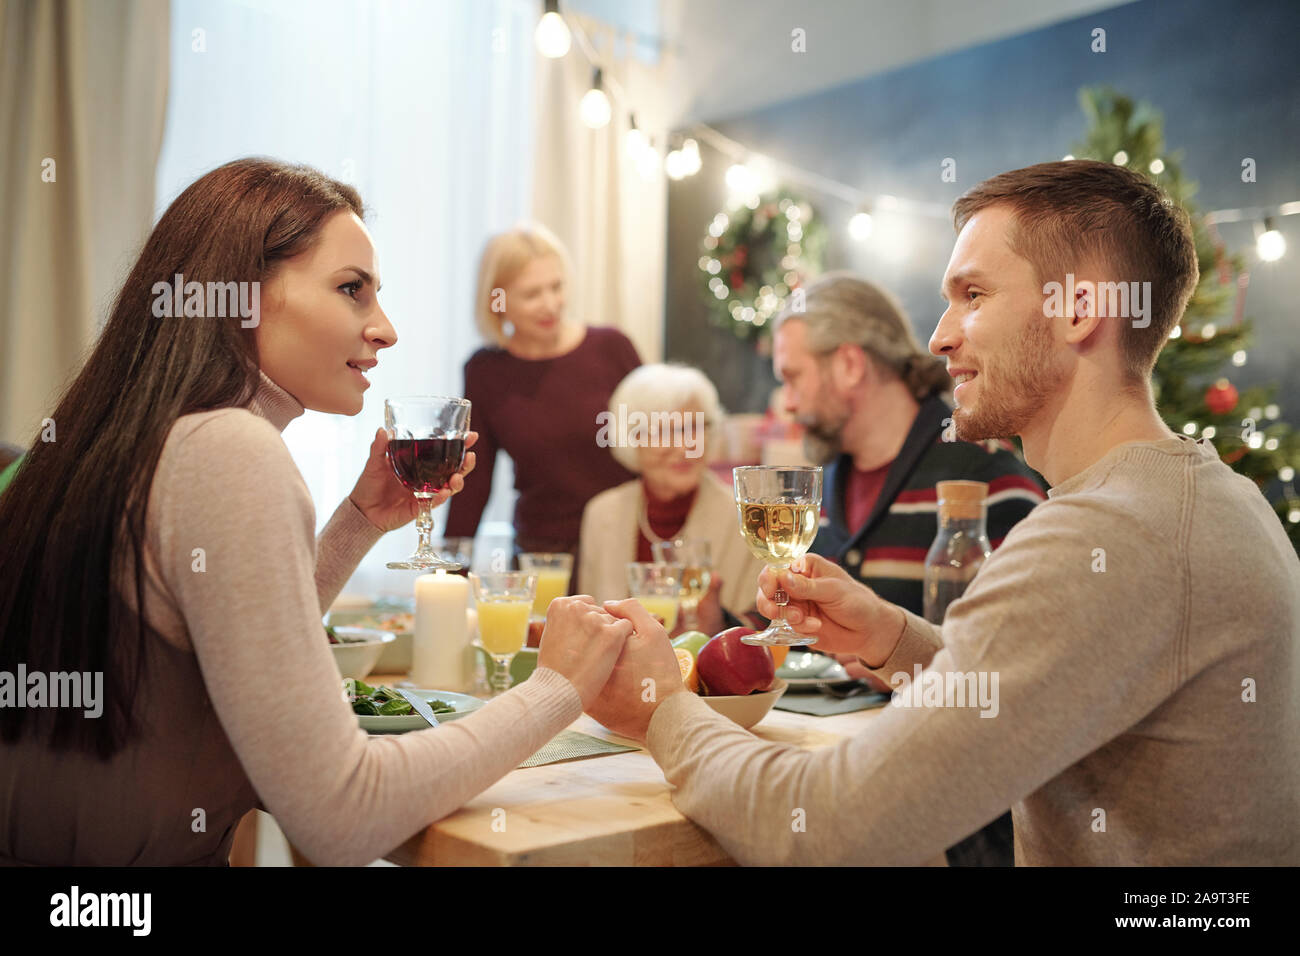 Young affectionate couple with glasses of wine making toast by served table Stock Photo